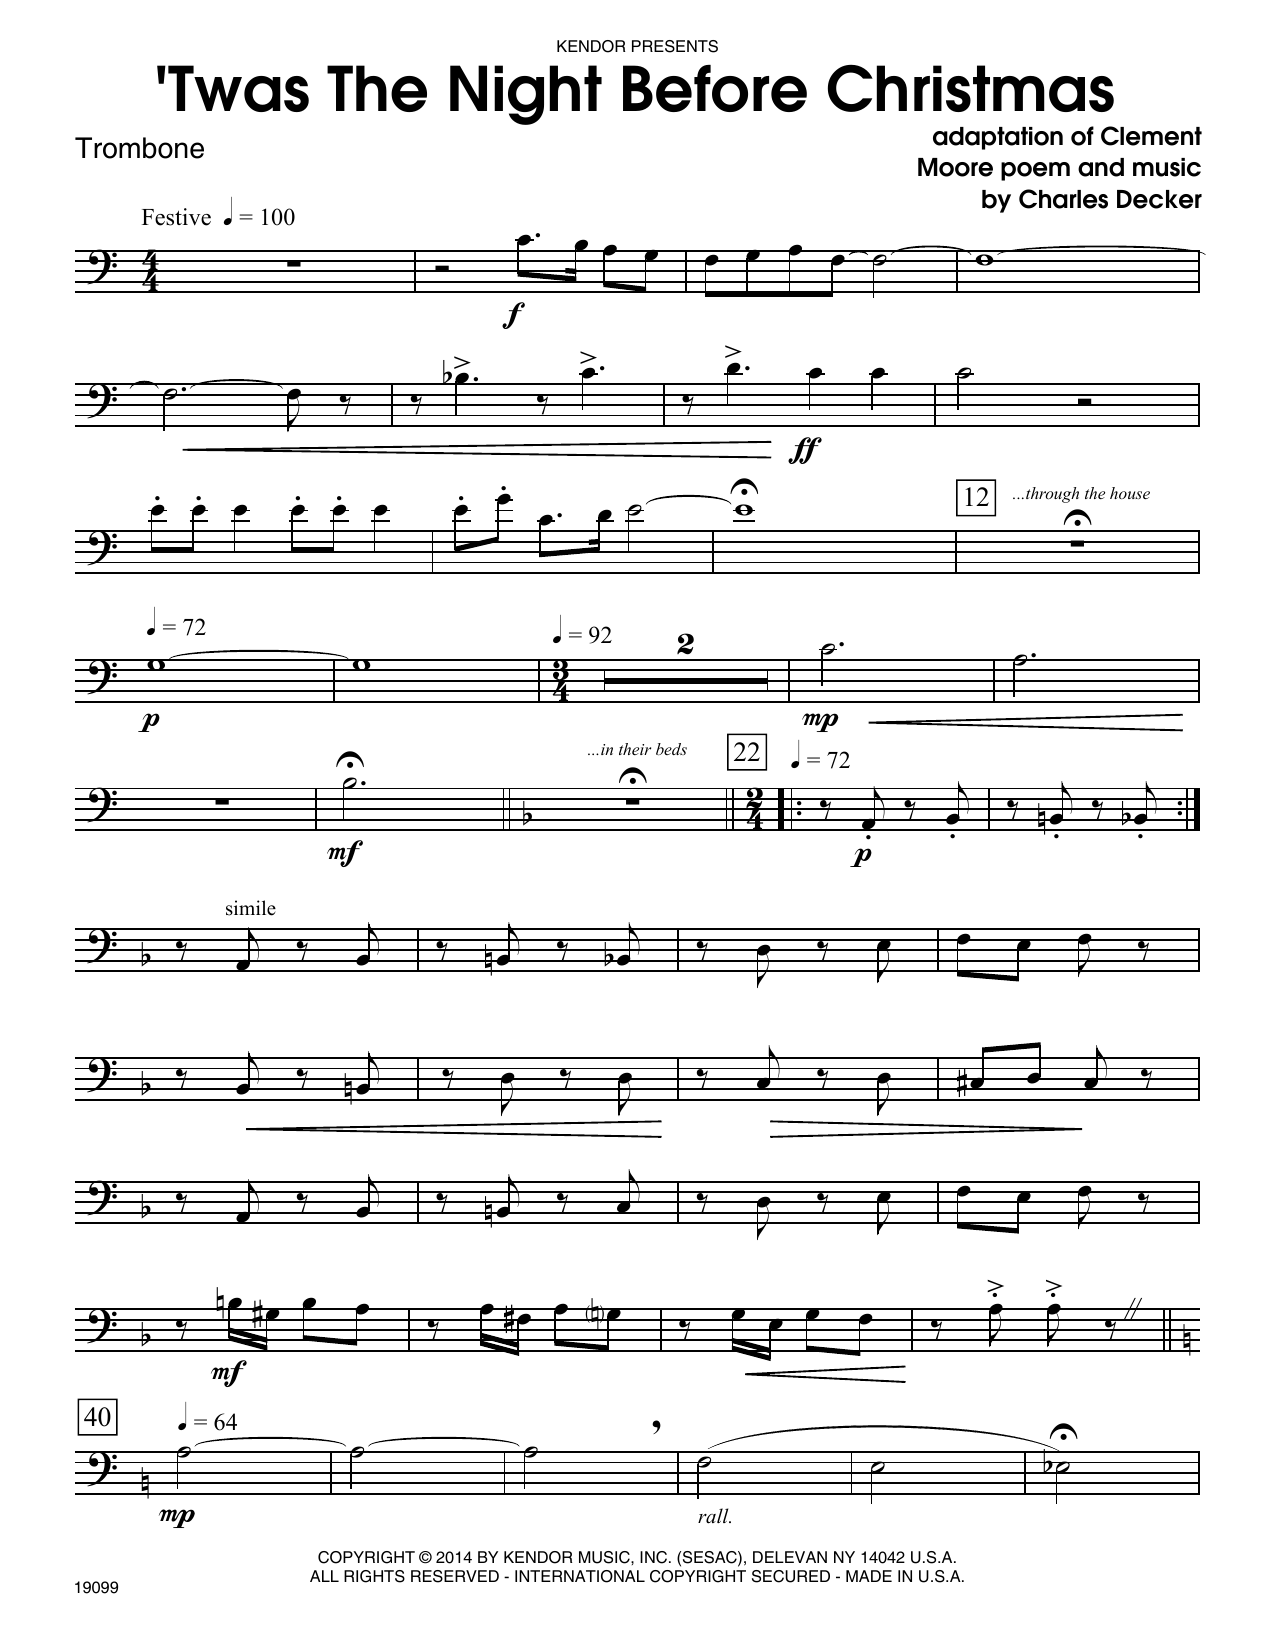 Download Charles Decker Twas The Night Before Christmas - Tromb Sheet Music